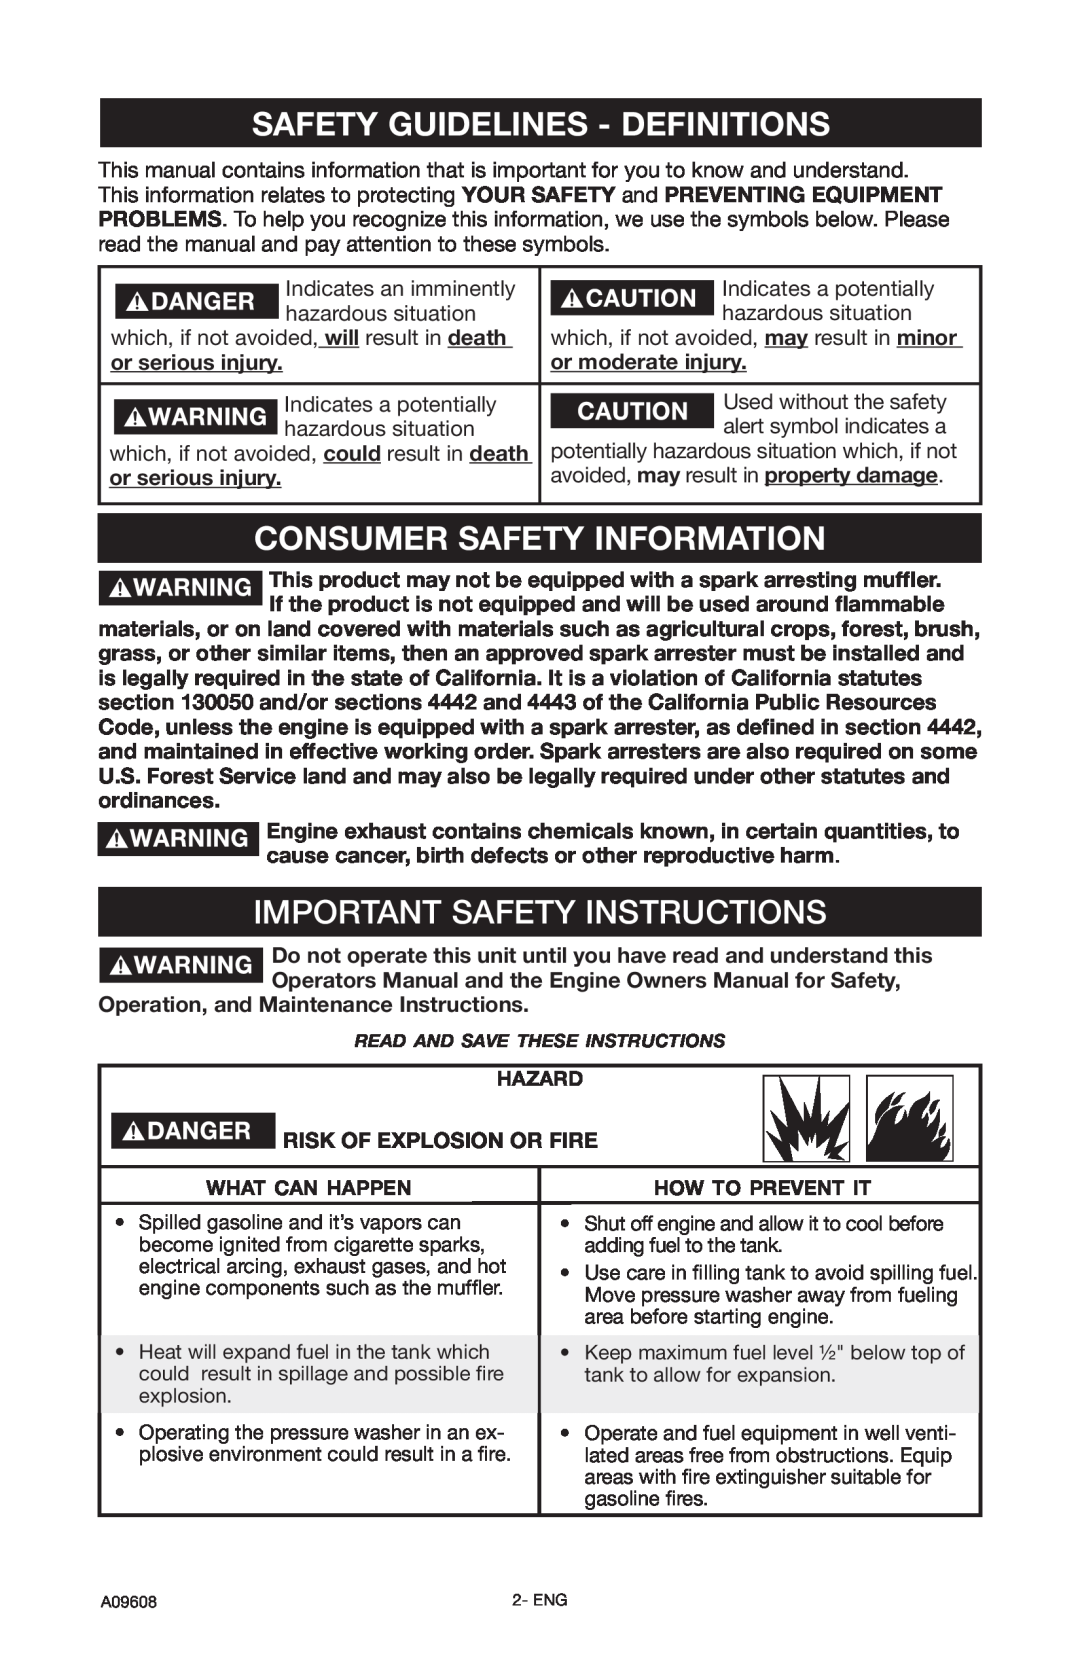 Porter-Cable A09608-0412-0 Safety Guidelines - Definitions, Consumer Safety Information, Important Safety Instructions 